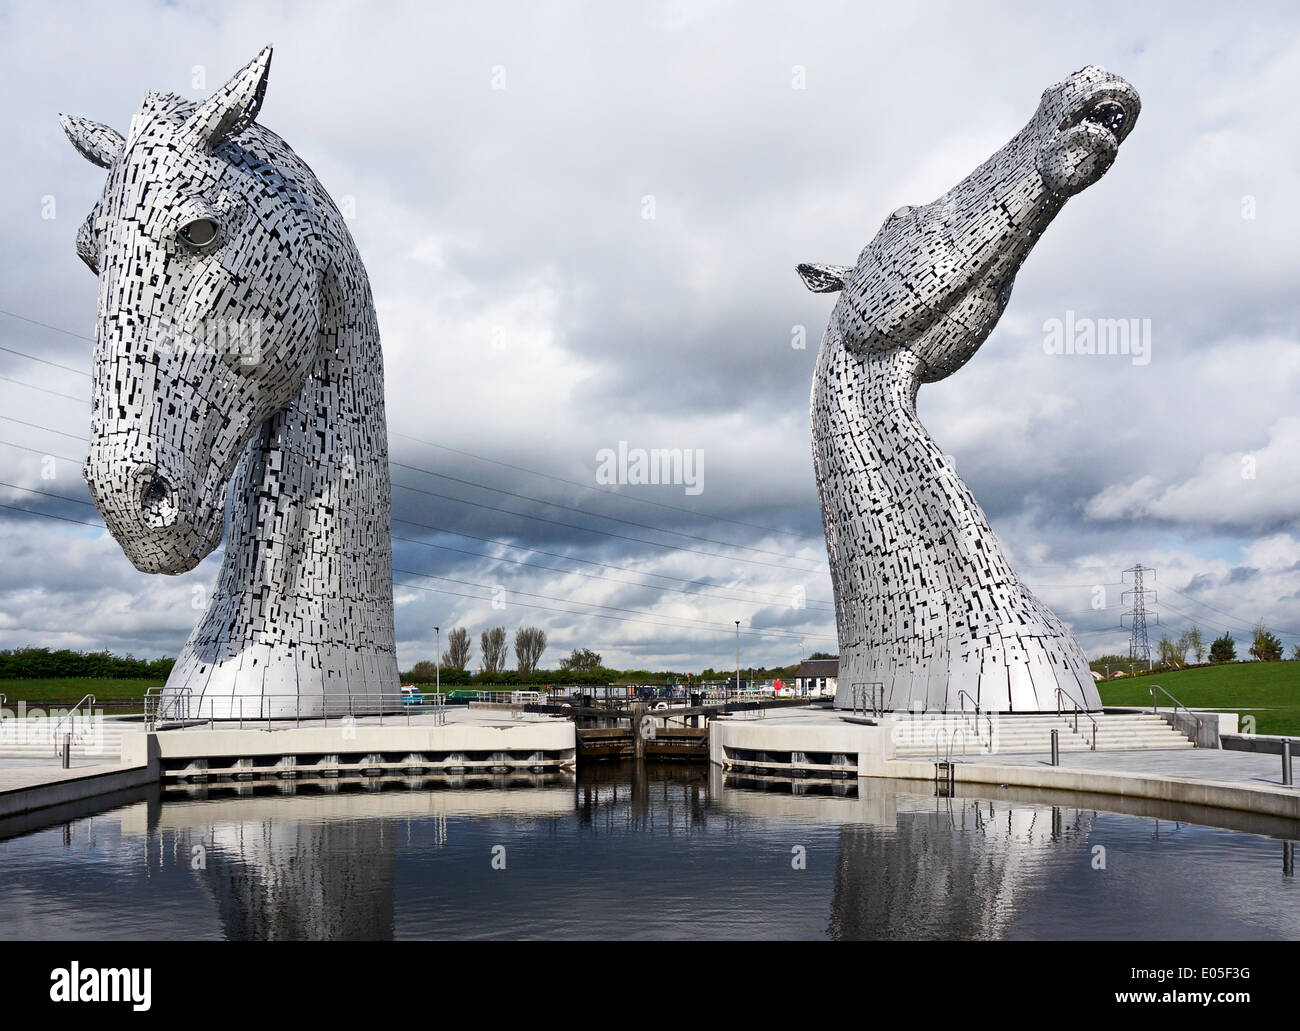 The Kelpies at The Helix on the Forth & Clyde canal by the River Carron Falkirk Scotland Stock Photo